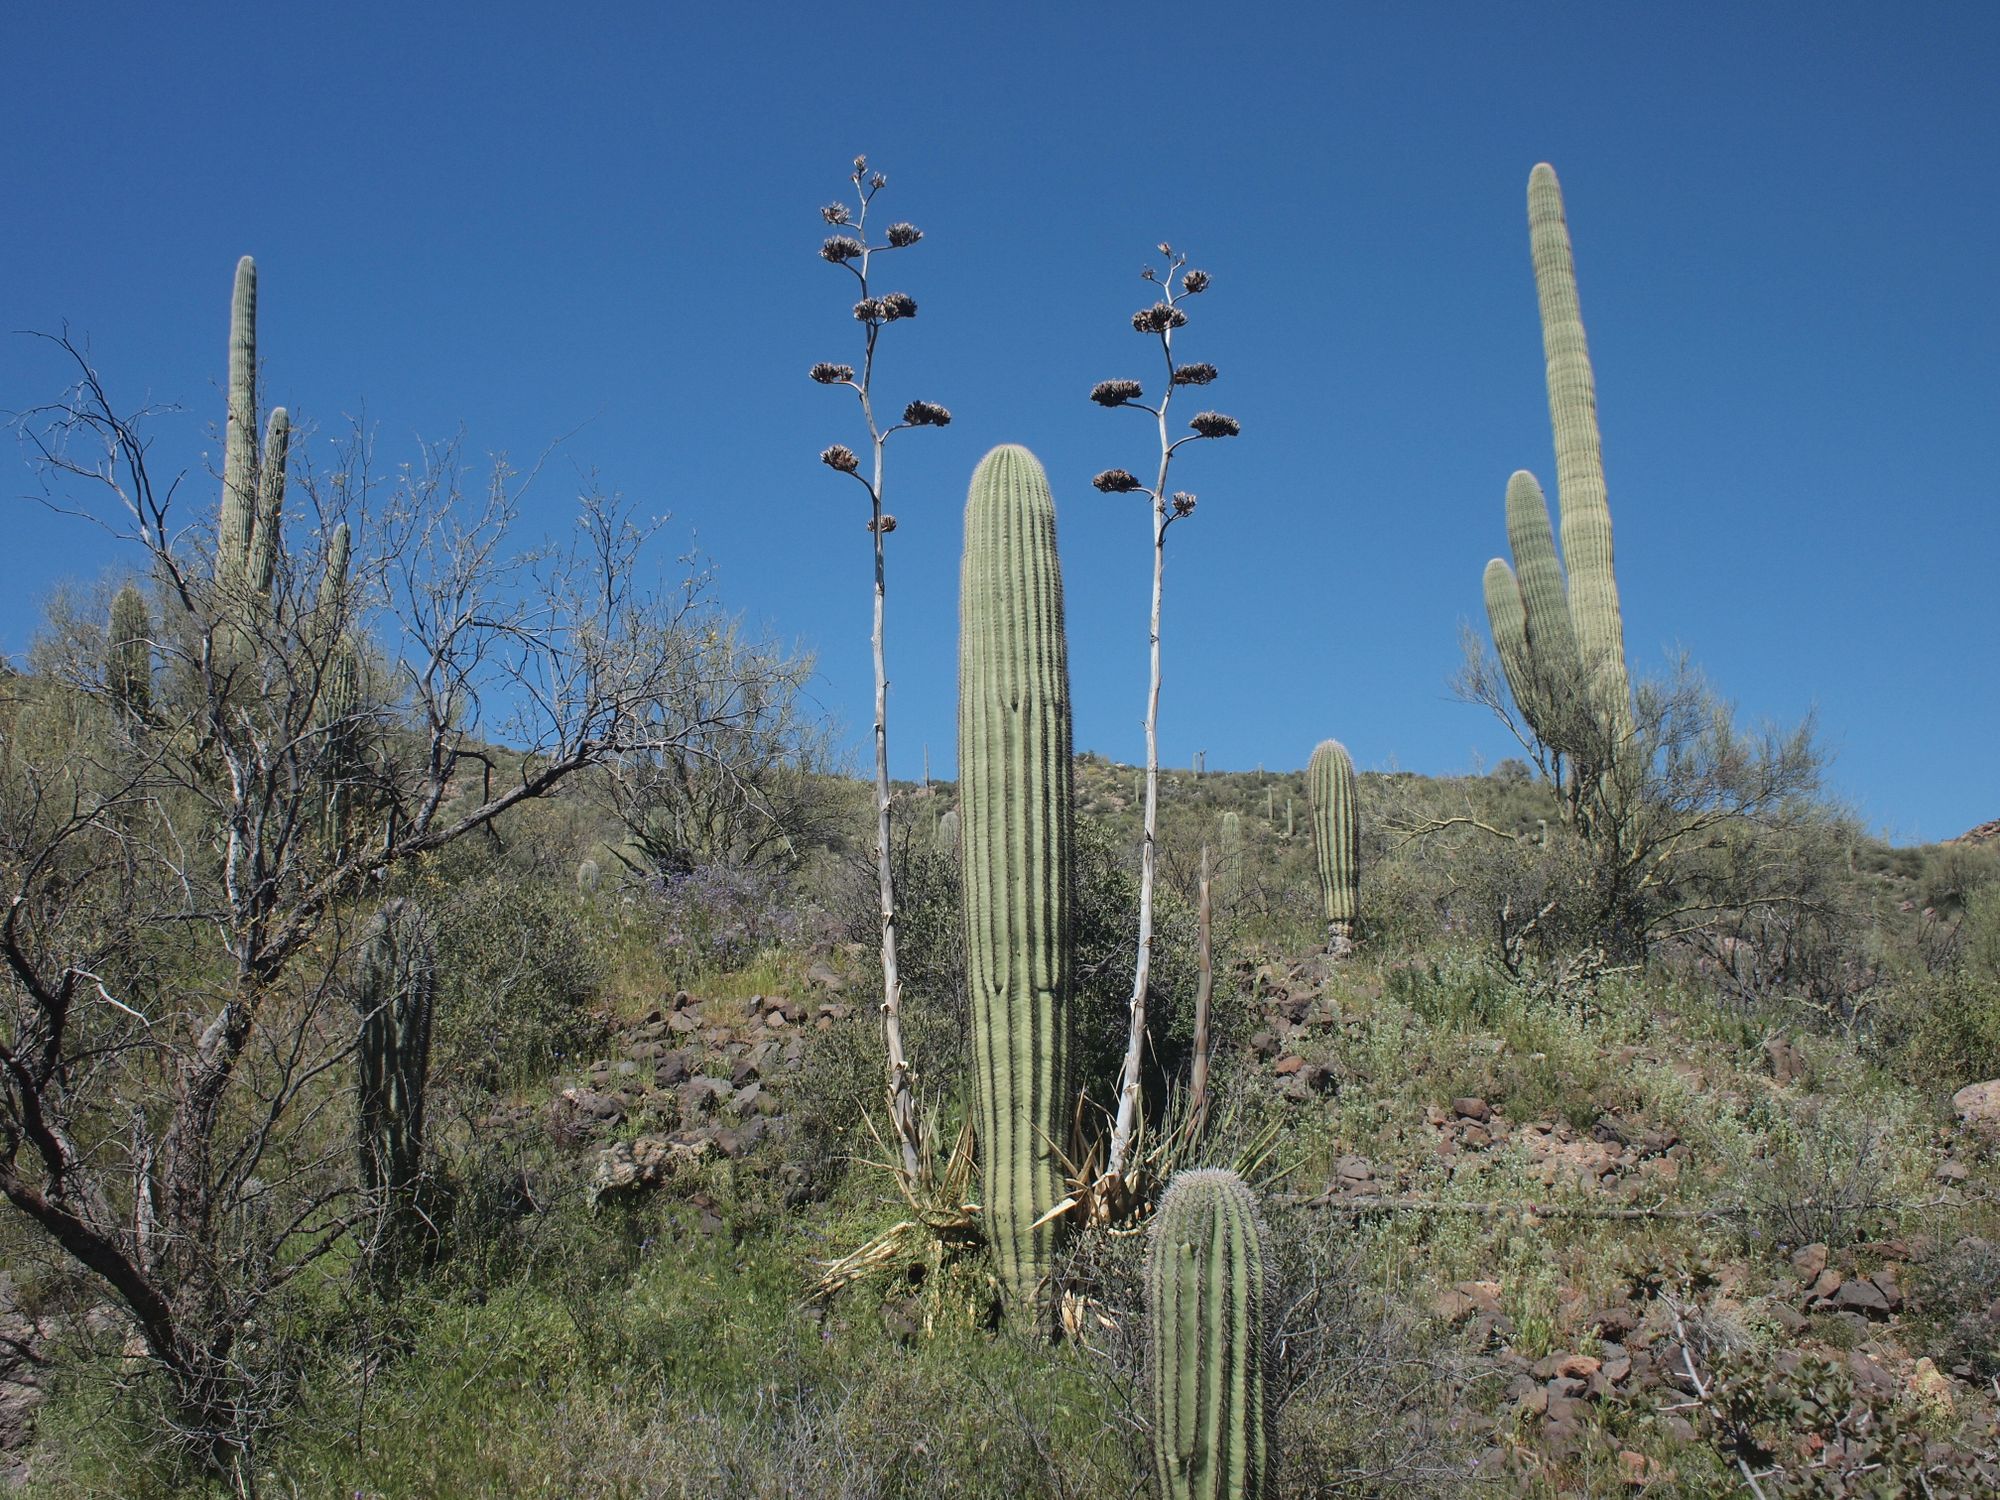 A desert scene with saguaro cactus, mesquite tree and two yucca that have flowered and died